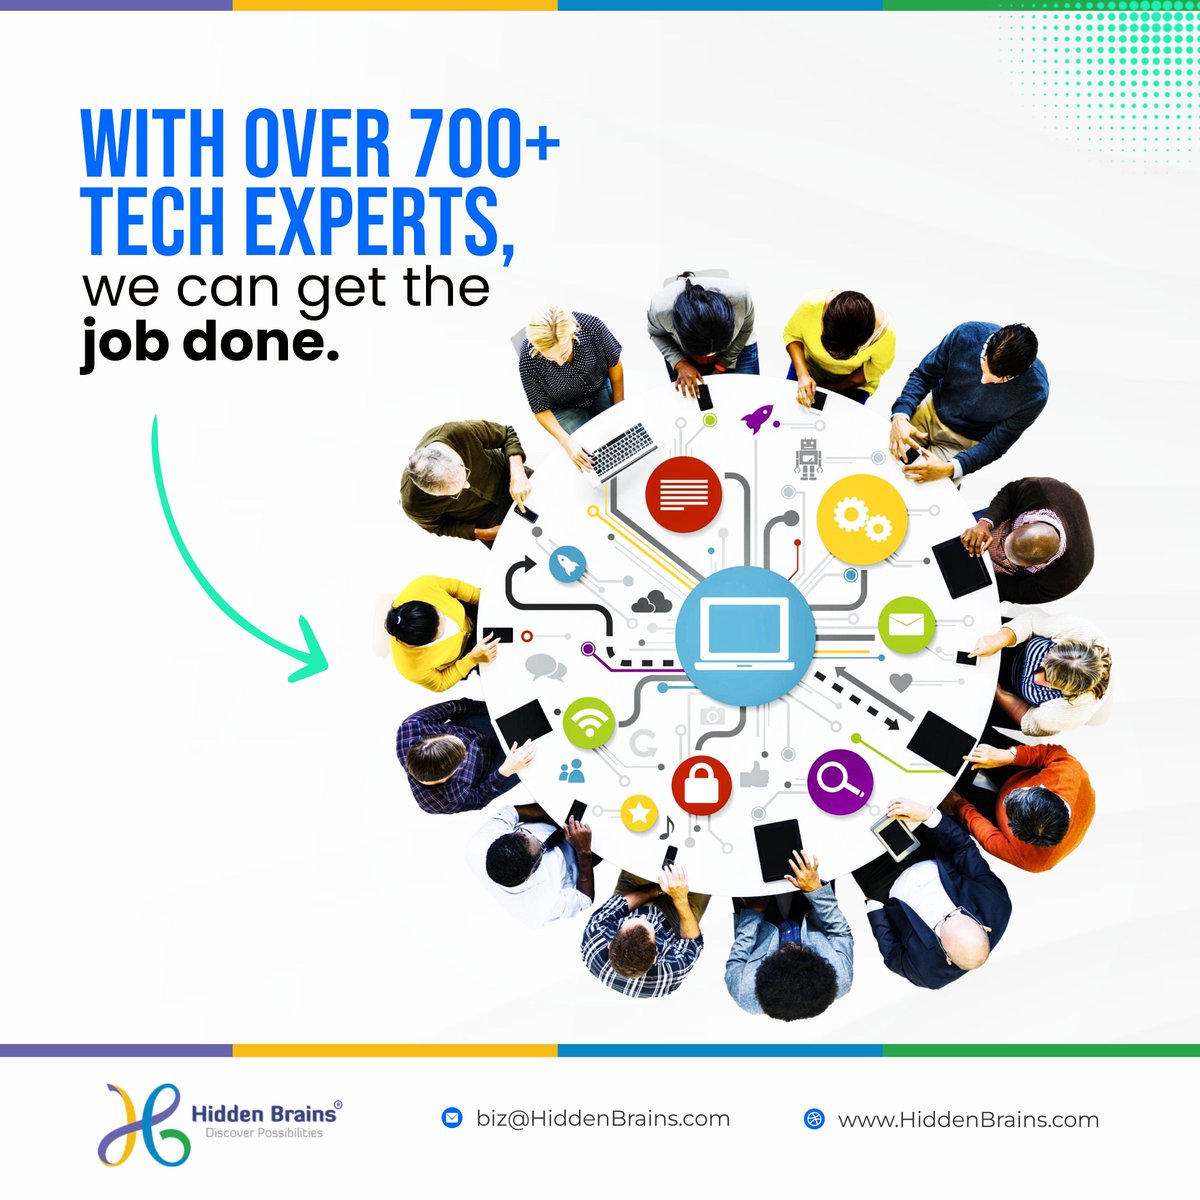 At Hidden Brains, we take pride in our talented team of tech experts dedicated to delivering cutting-edge solutions for all your digital needs.

With over 700+ Tech Experts, we can get the job done. Be our next success story.

#HiddenBrains #TechExperts #TechnologyPartner #Tech